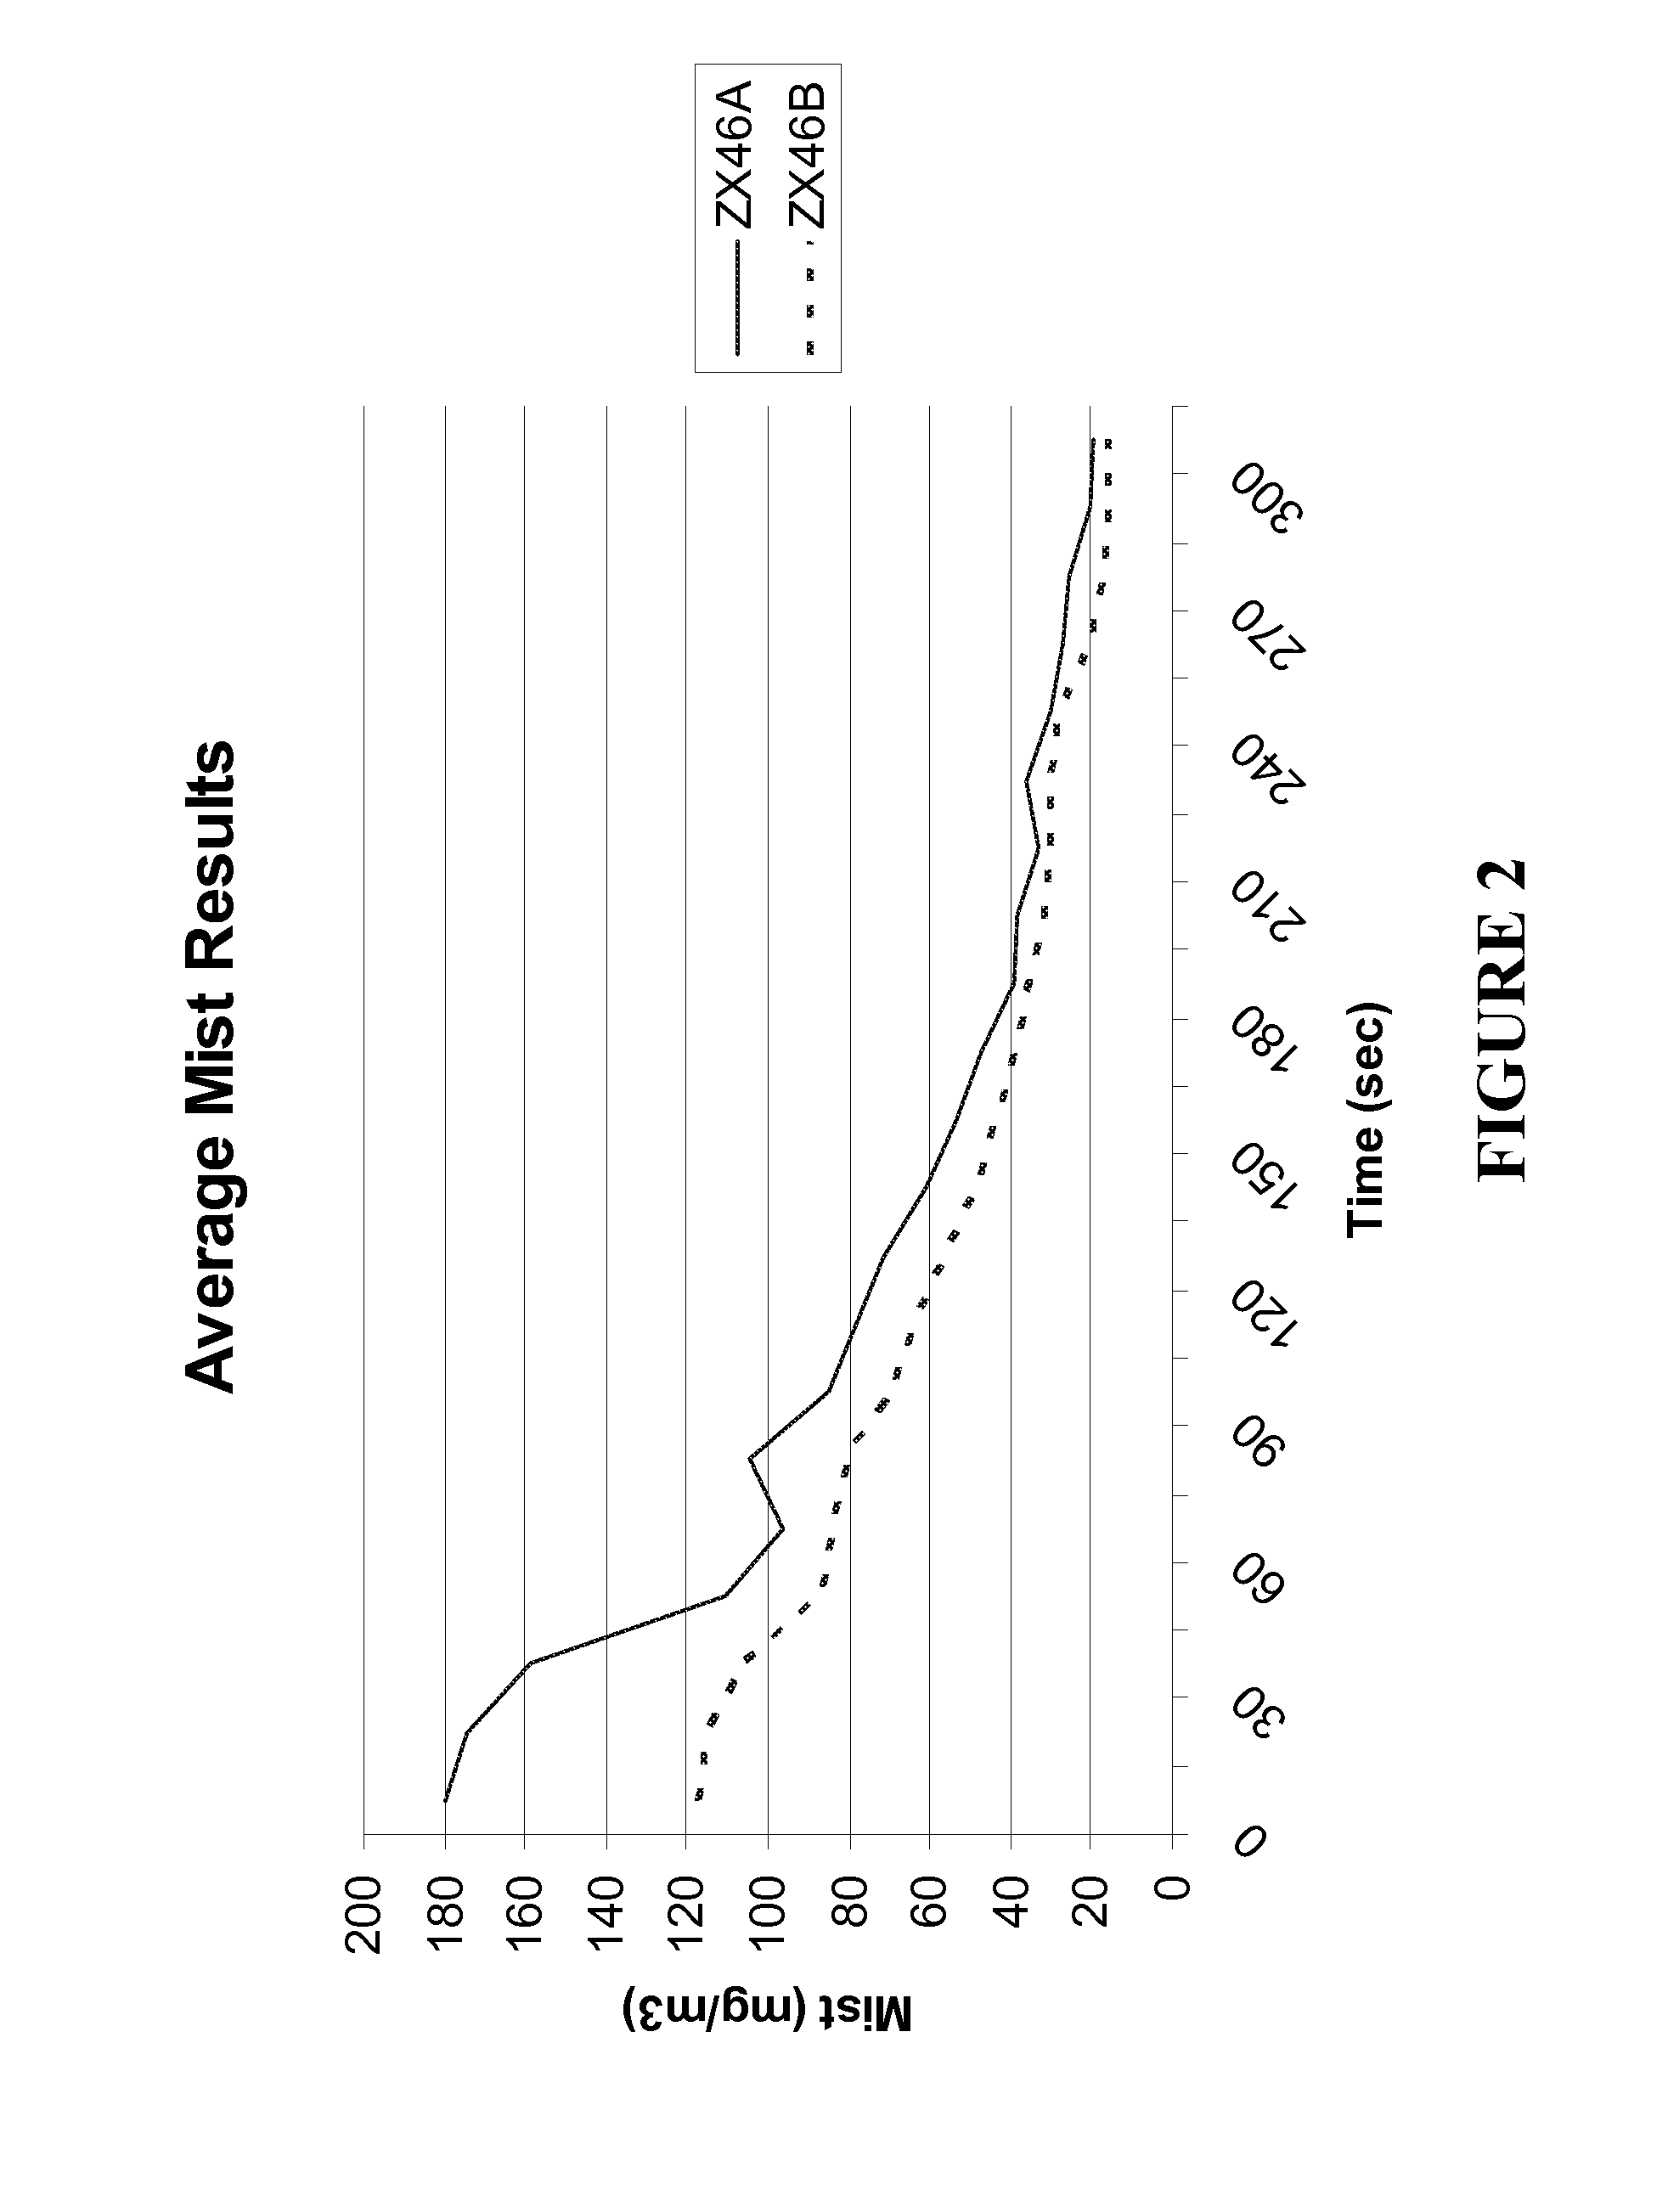 Metalworking Fluid Compositions and Preparation Thereof